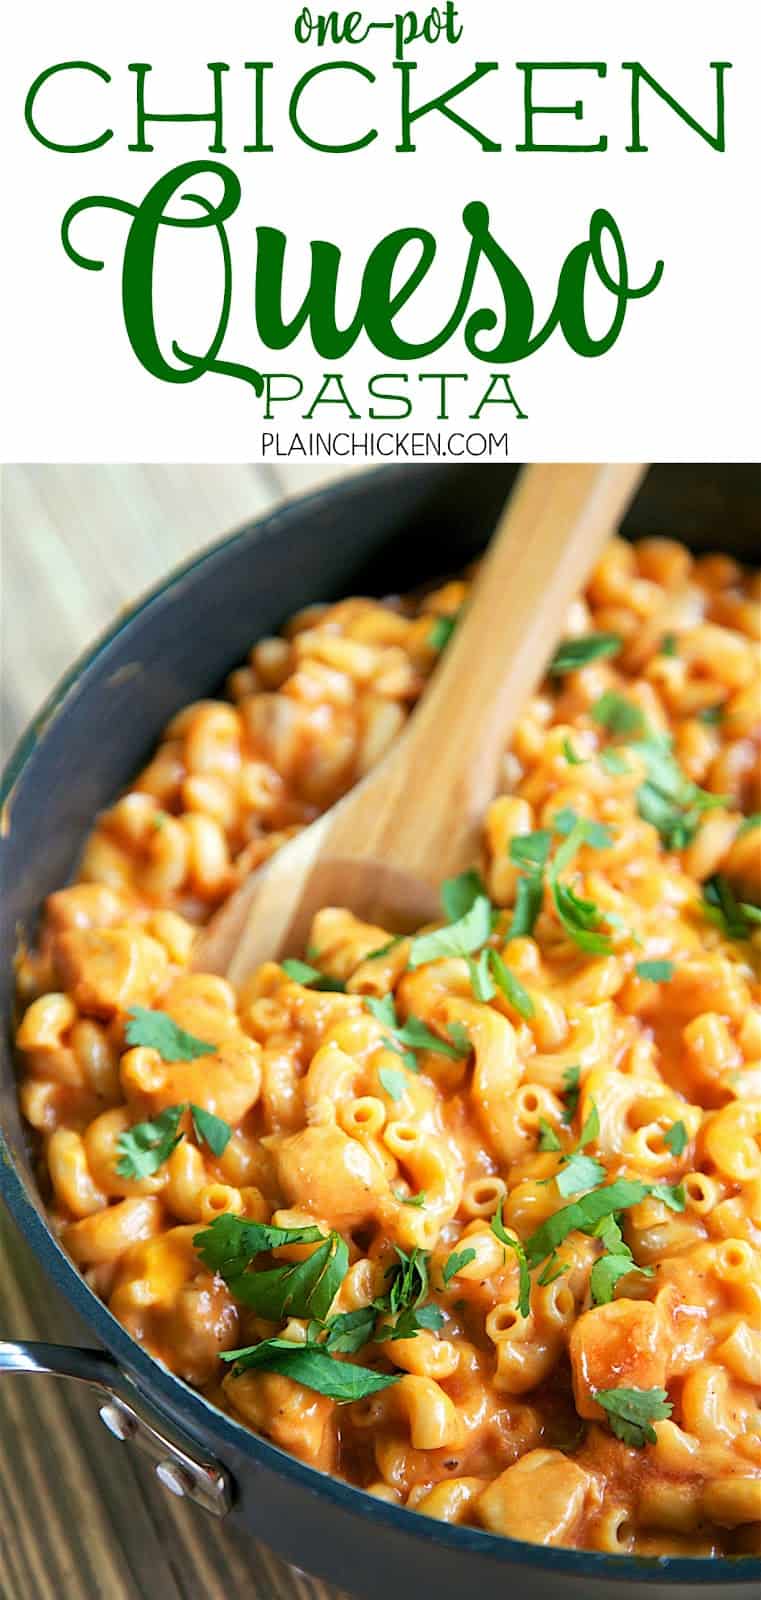 One Pot Chicken Queso Pasta - everything cooks in the same pan, even the pasta! Only 6 ingredients! Chicken, taco seasoning, chicken broth, salsa, pasta and velveeta. Everyone cleaned their plates! Quick, easy Mexican recipe that is ready in 20 minutes!